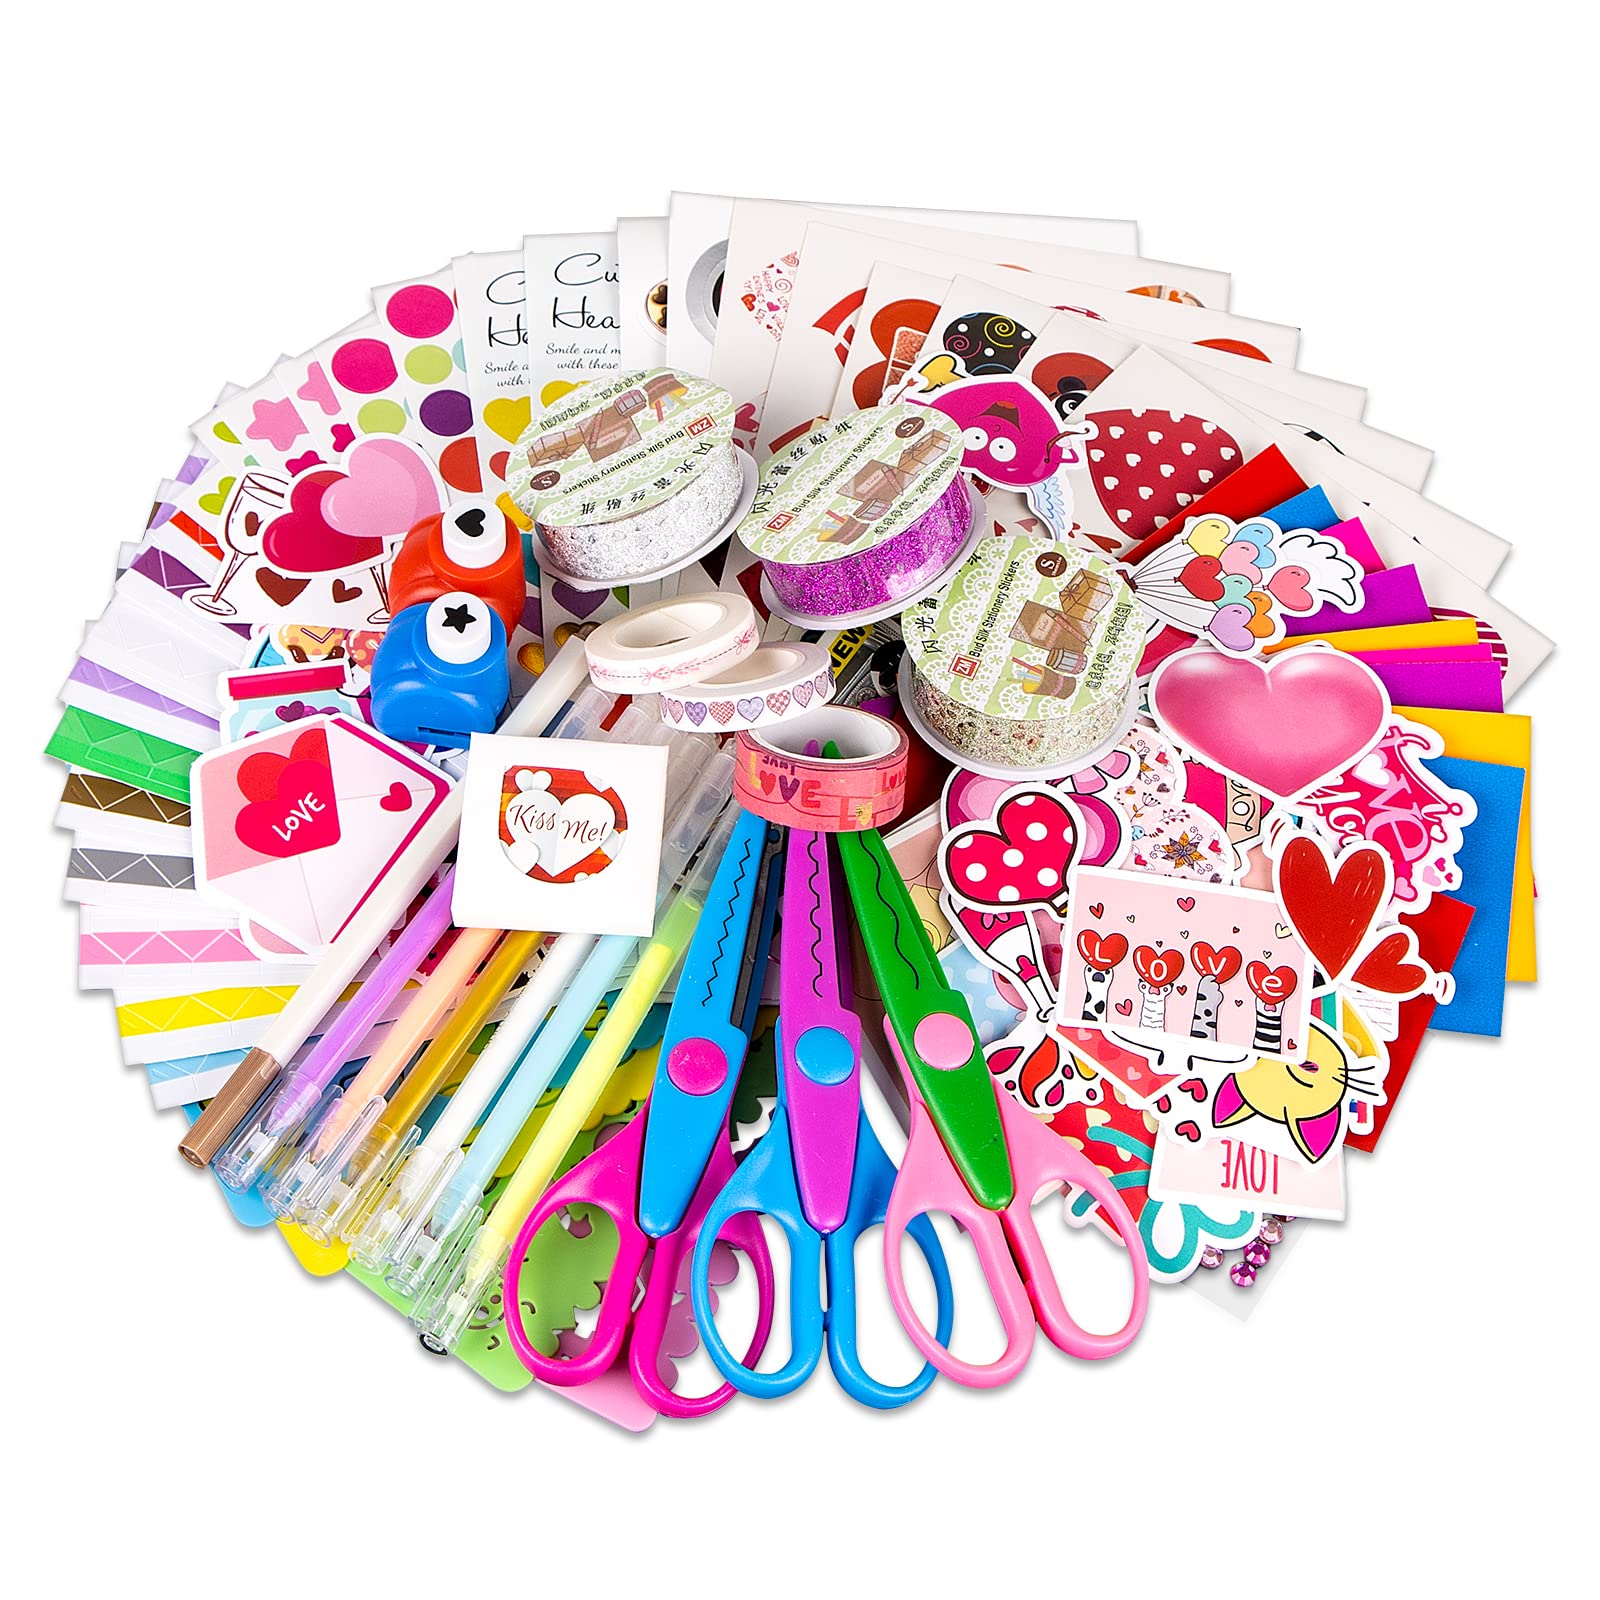 SICOHOME Scrapbooking Supplies Kit,Valentine's Day Scrapbooking